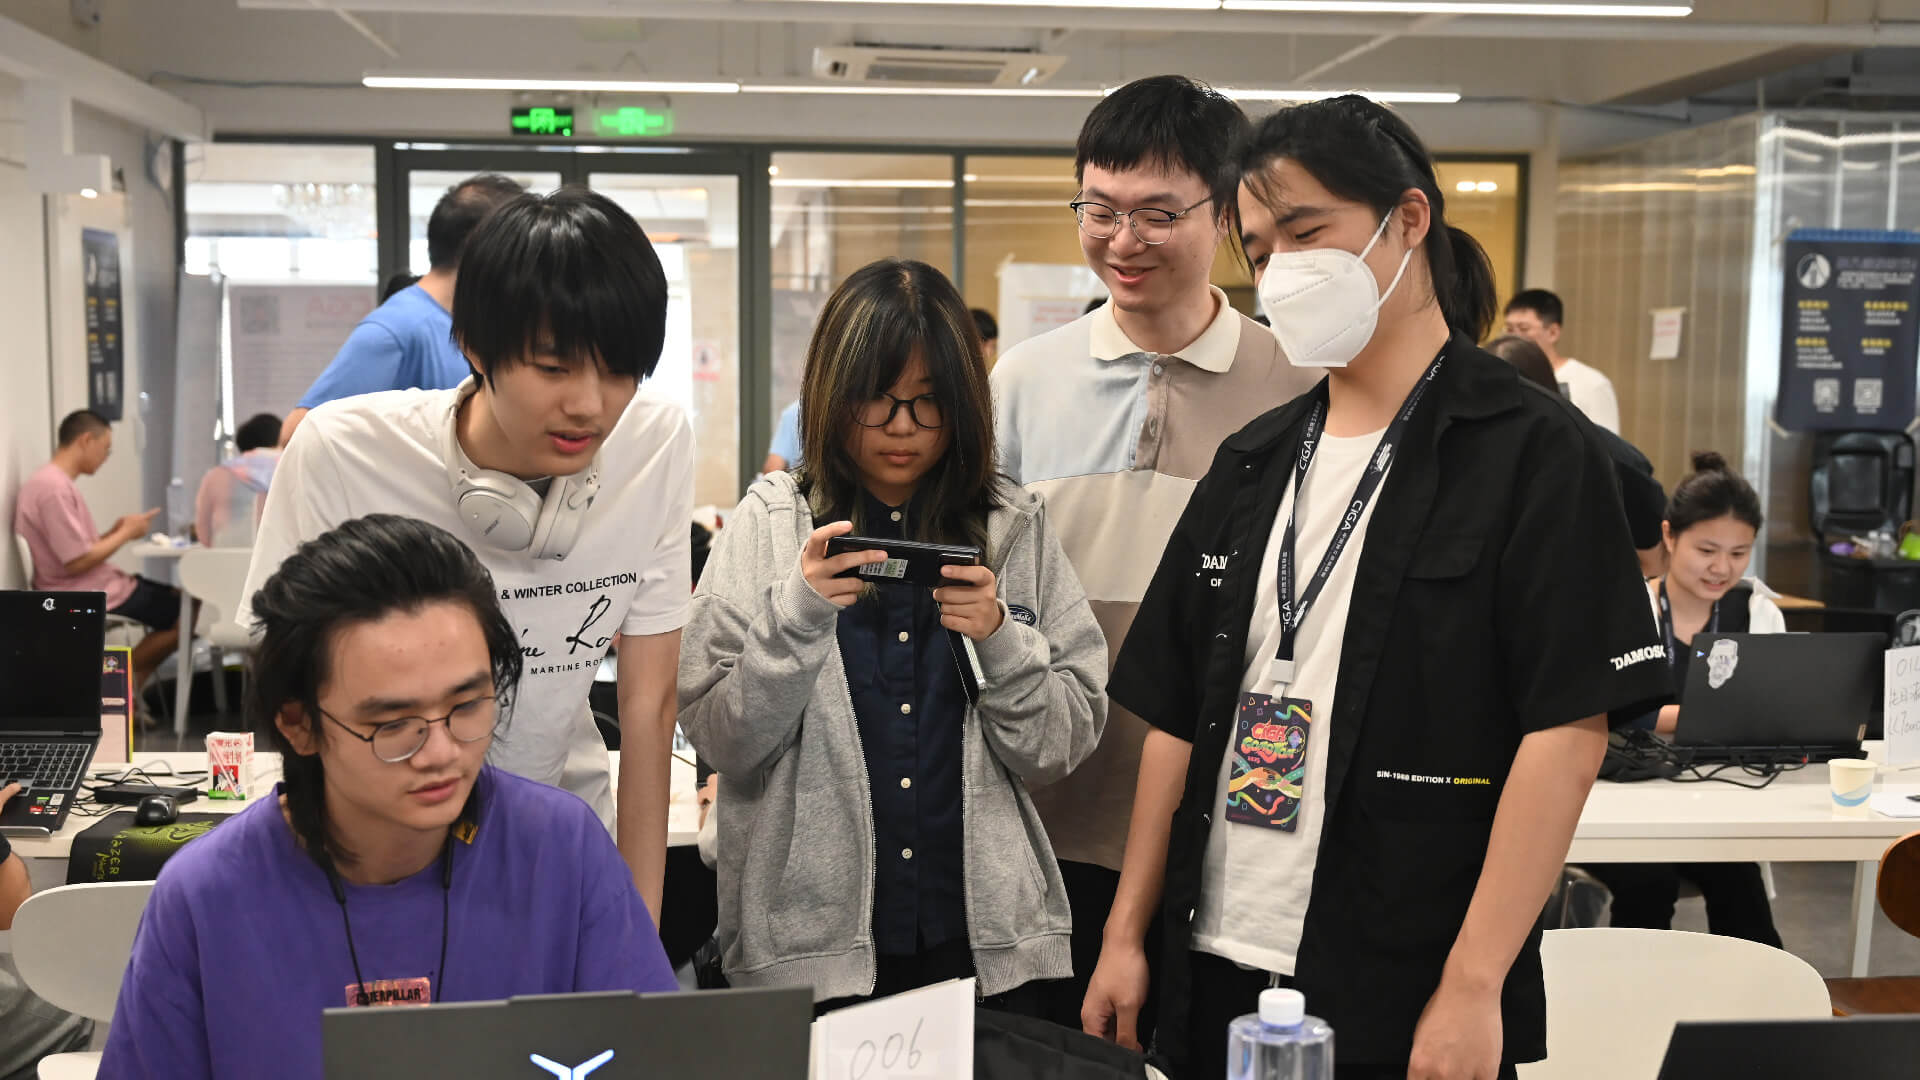 A team of high school students and college freshmen are working on a game named “Touch & Stick” during the GameJam event hosted in ChillyRoom’s office